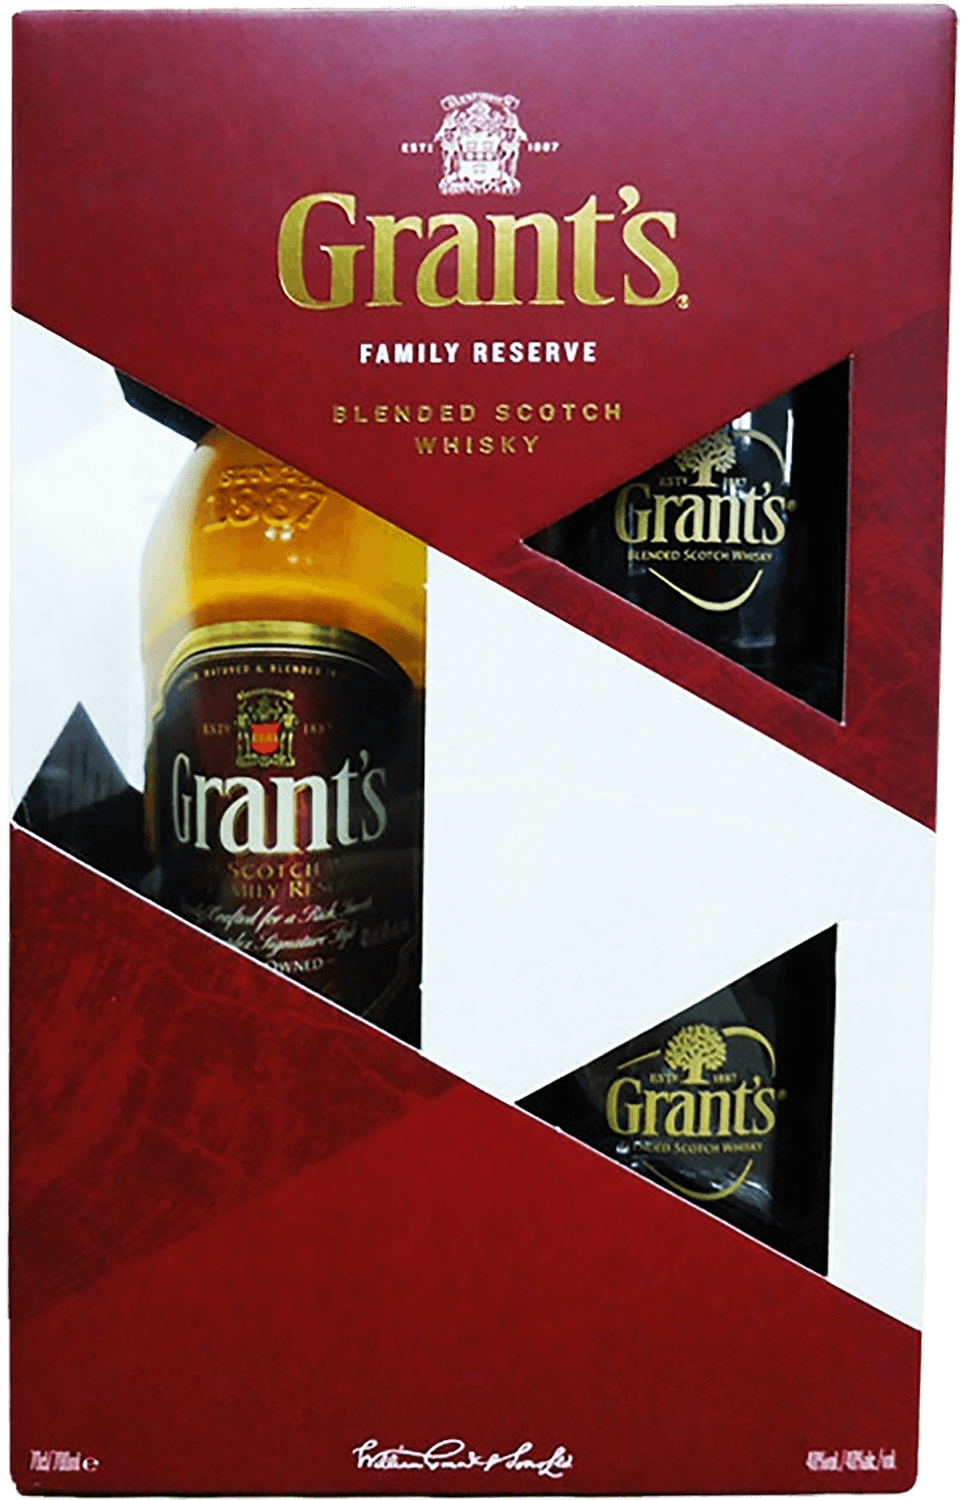 Grant's Family Reserve Blended Scotch Whisky (gift box with 2 glasses)